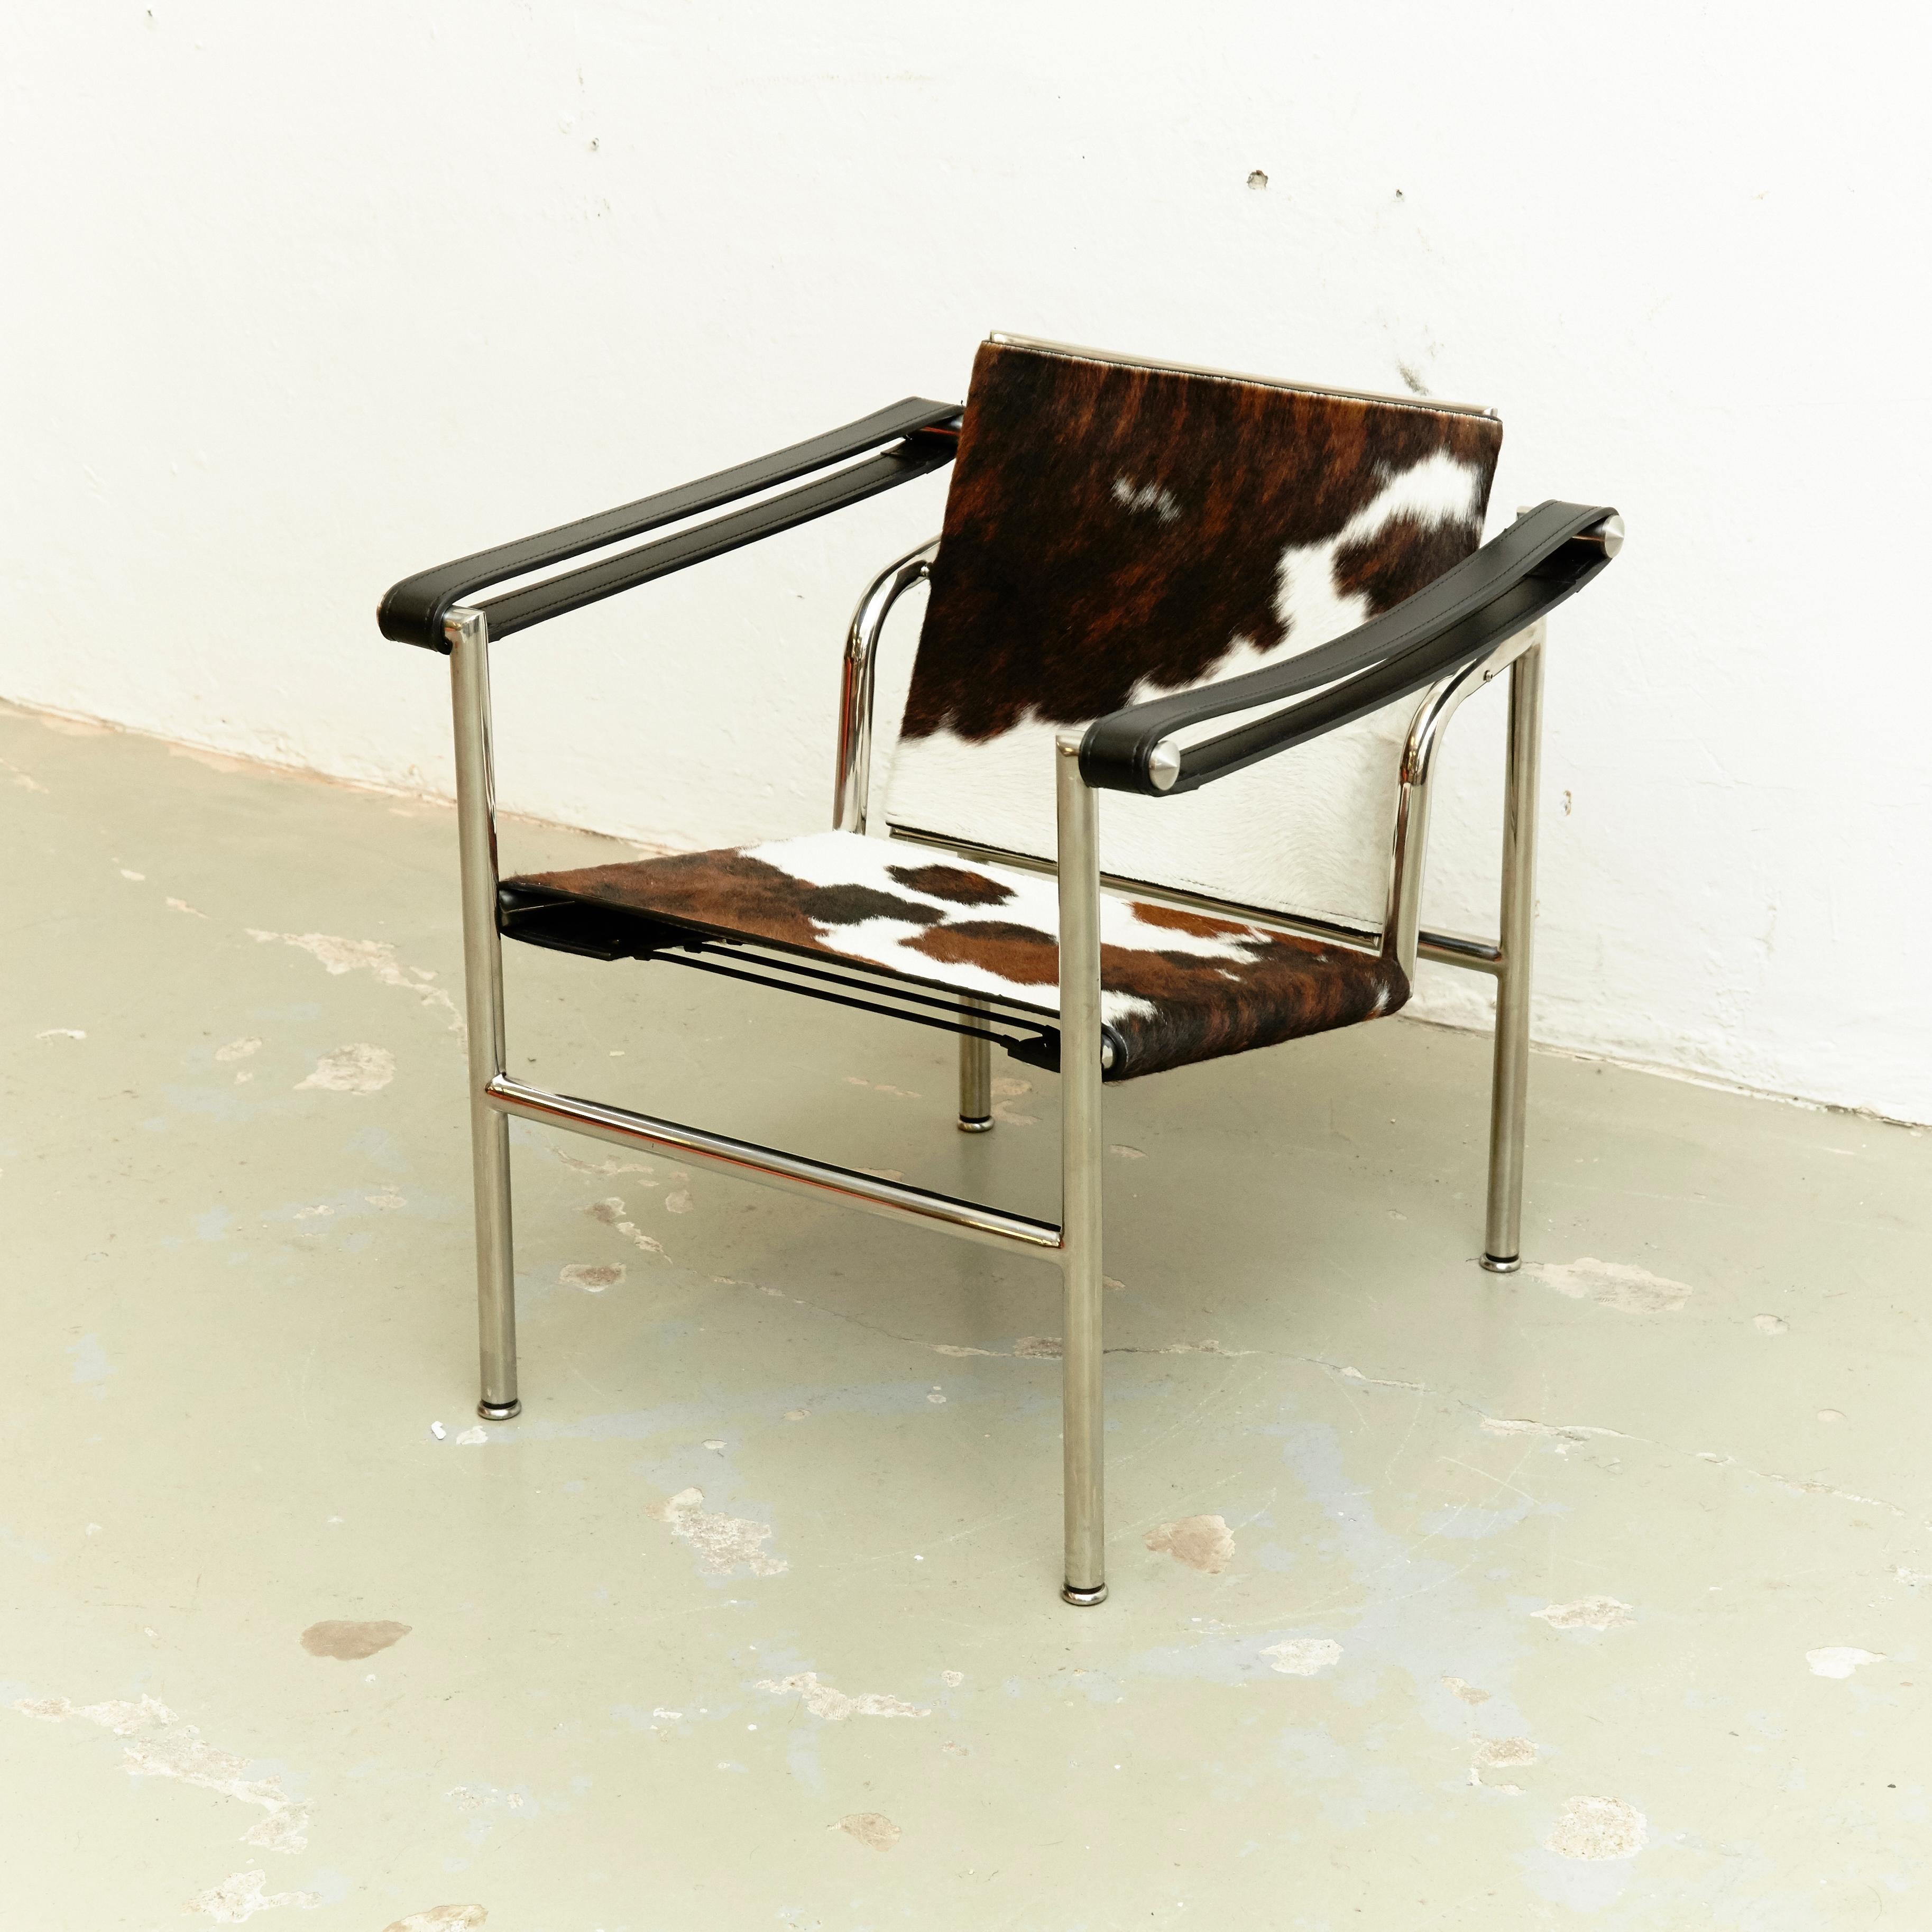 Le Corbusier, Pierre Jeanneret and Charlotte Perriand LC1 Pony Skin lounge chair
chromed steel, leather and pony skin.
By unknown manufacturer.
Manufactured, circa 1970.

In good original condition with minor wear consistent of age and use,